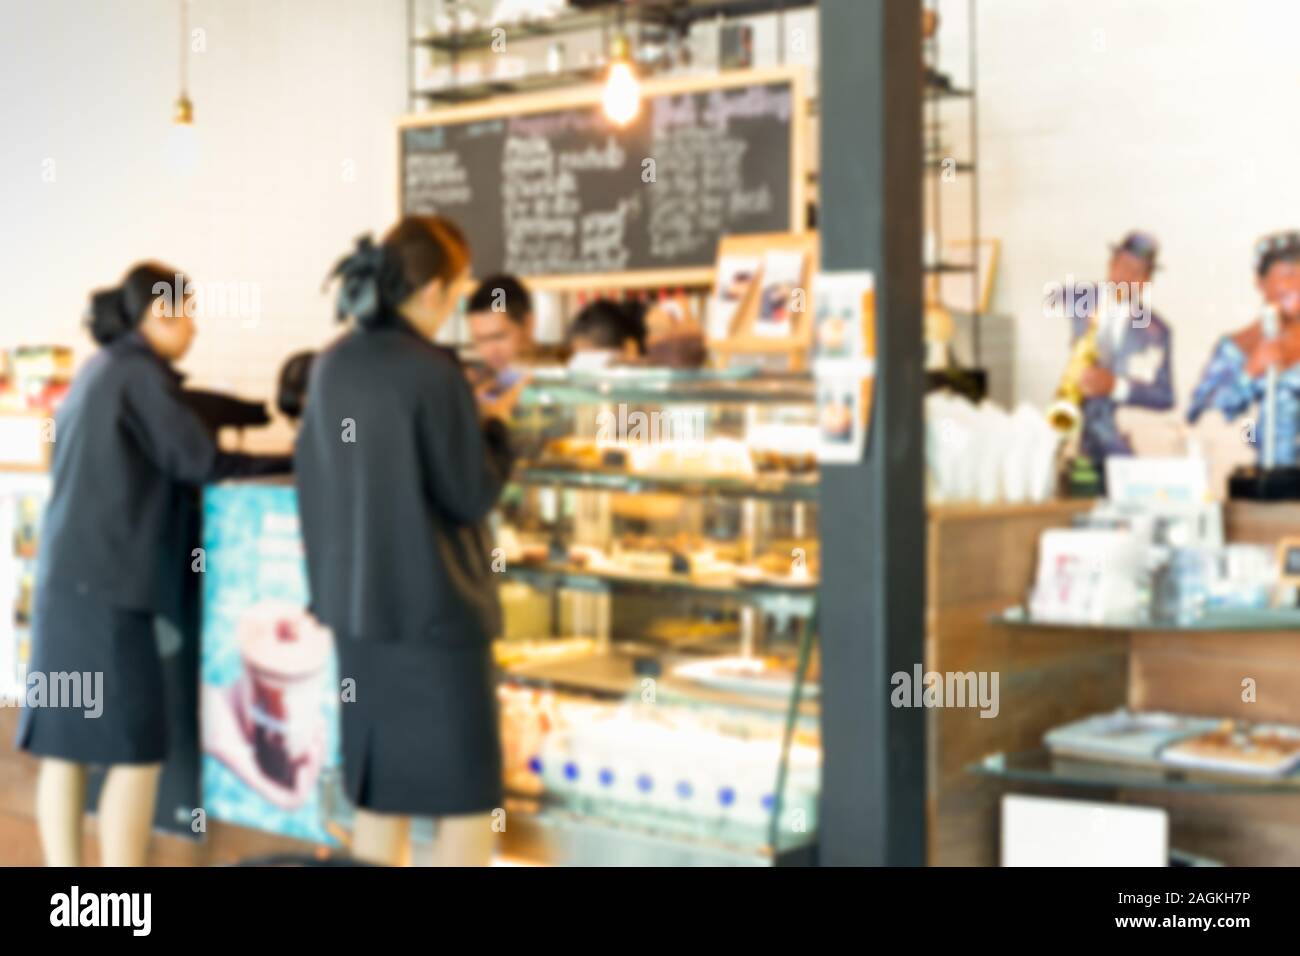 Blurred background barista service customers at counter in coffee shop business concept. Stock Photo